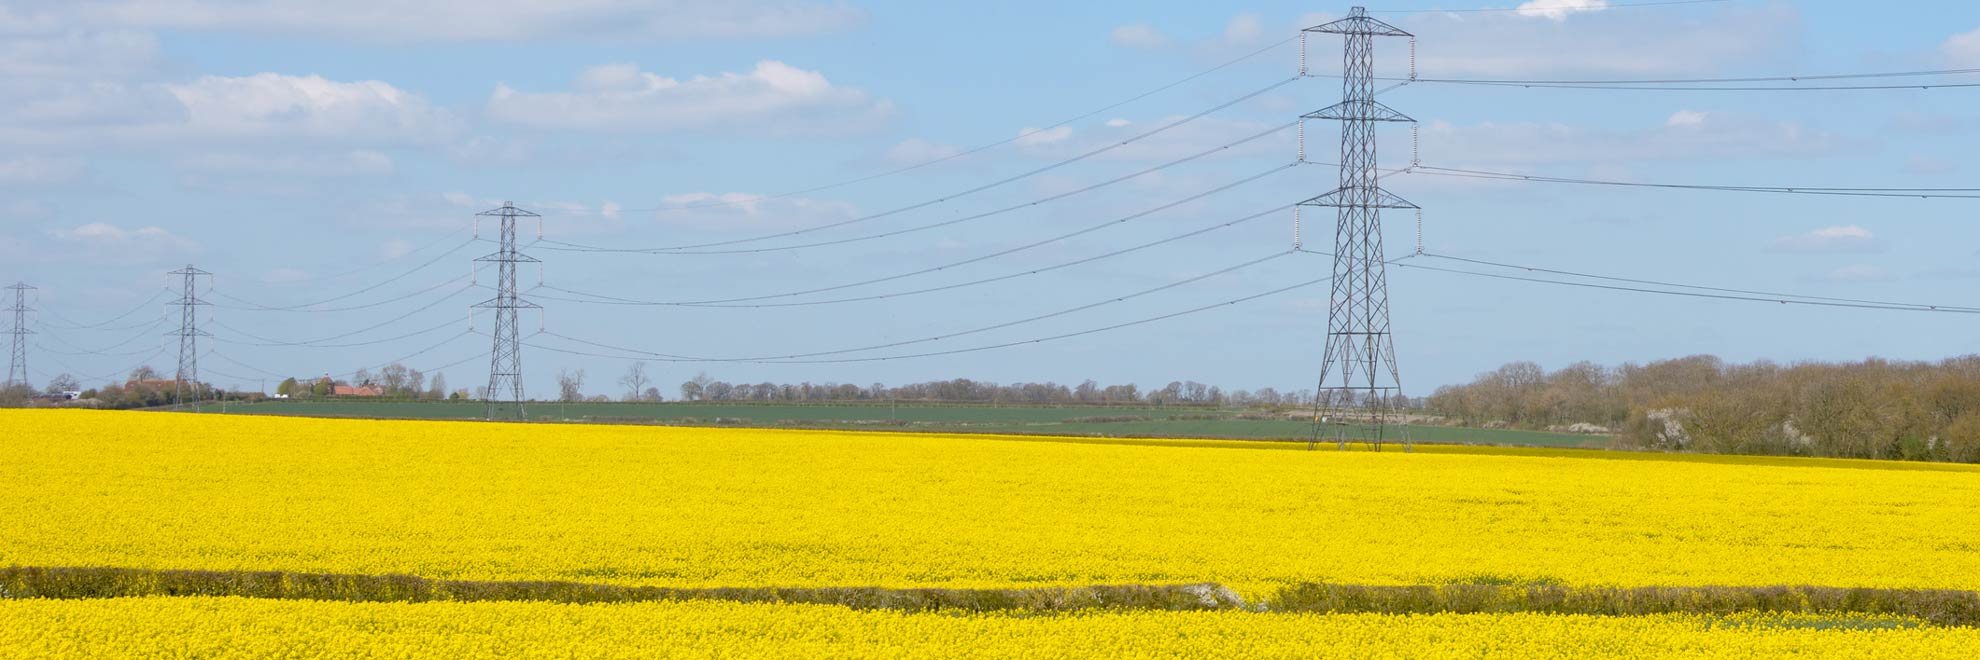 rapeseed electricity